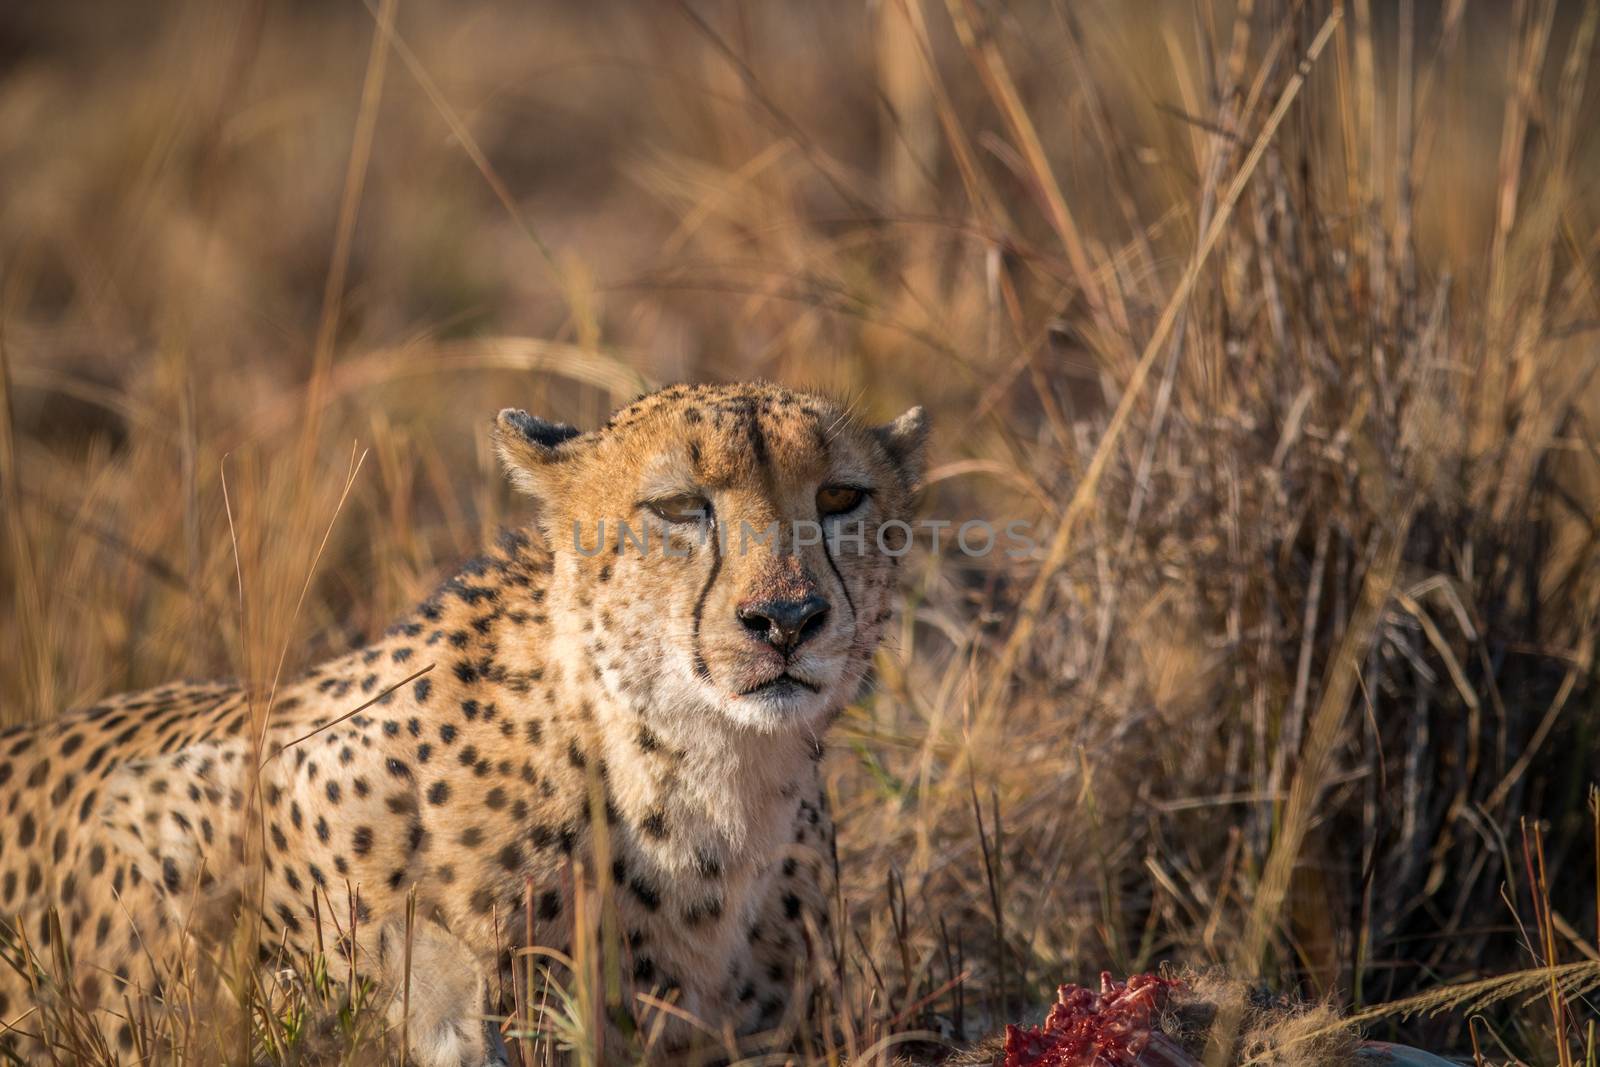 Cheetah eating from a Reedbuck carcass in the Kruger National Park, South Africa.